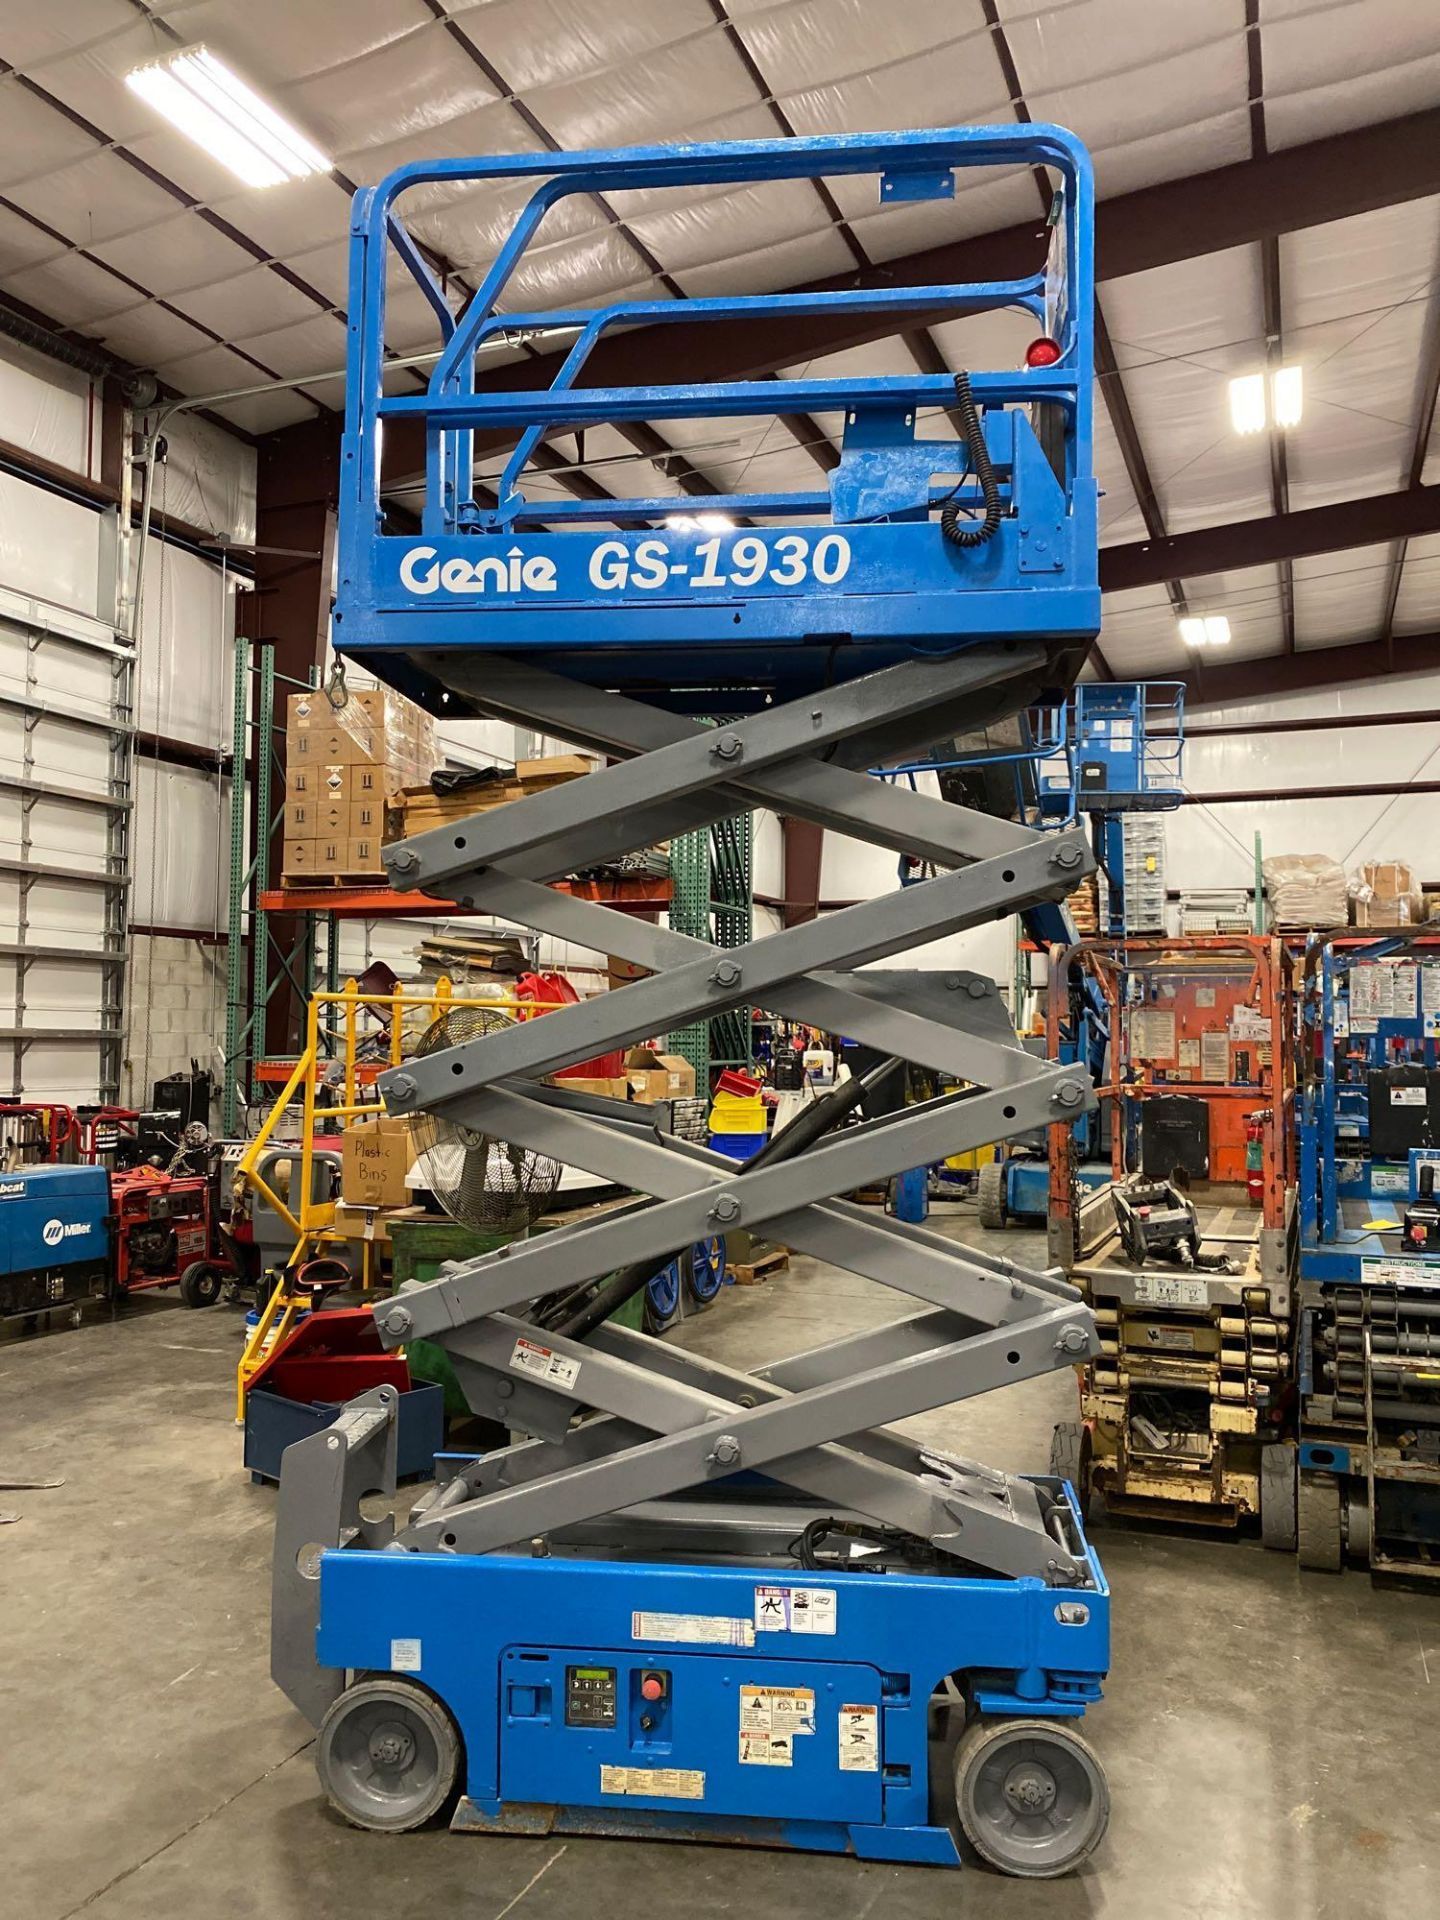 2013 GENIE GS-1930 ELECTRIC SCISSOR LIFT, 19' PLATFORM HEIGHT, SELF PROPELLED, BUILT IN BATTERY CHAR - Image 7 of 7